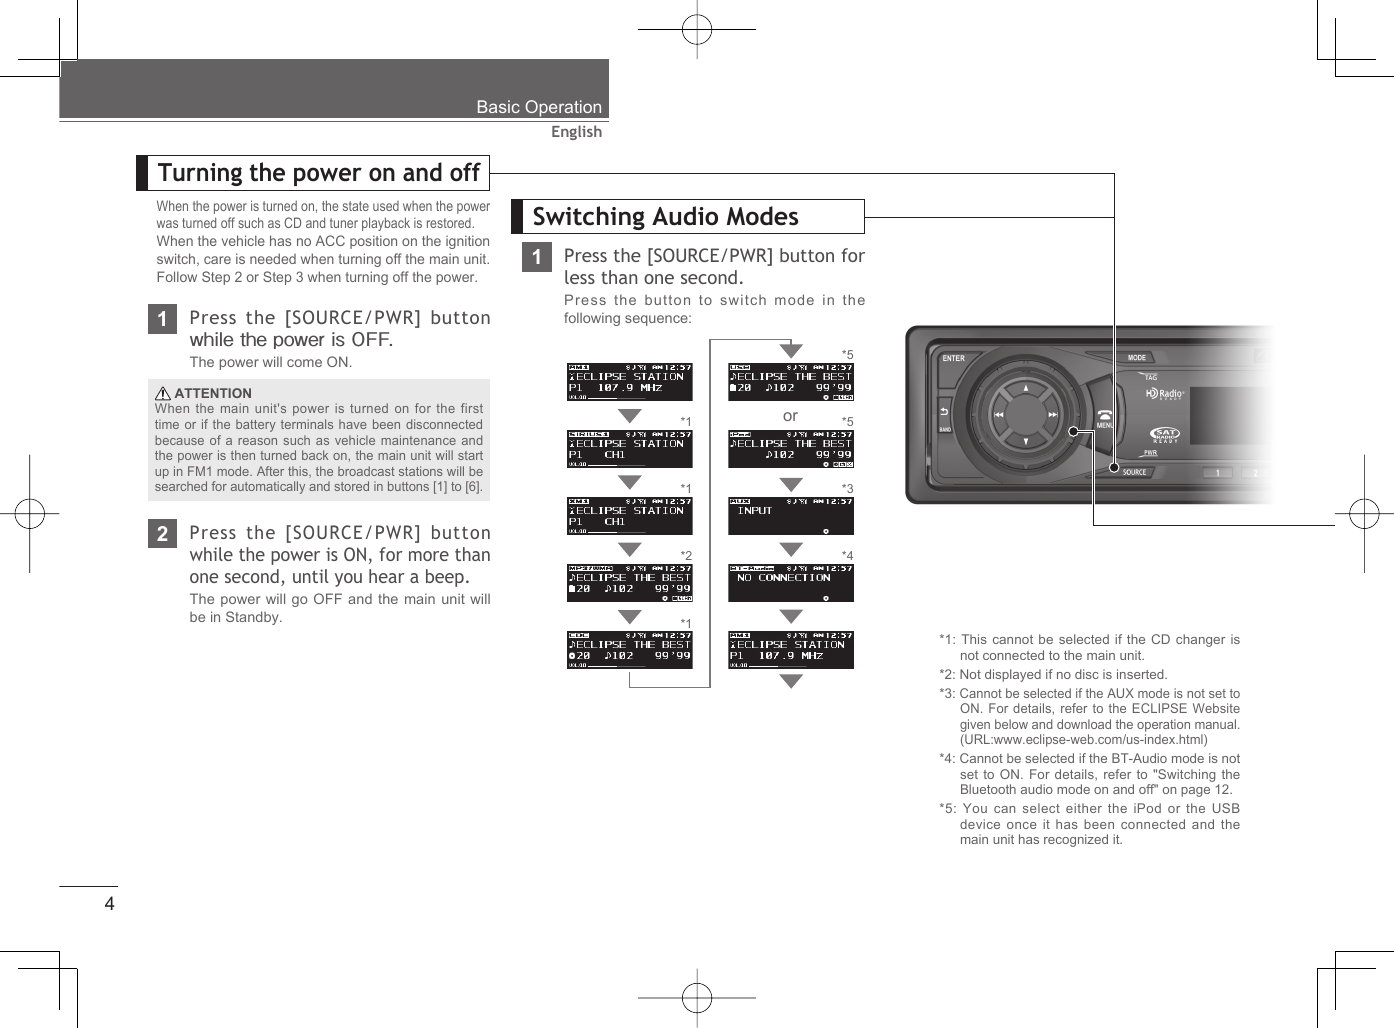 4EnglishWhen the power is turned on, the state used when the power was turned off such as CD and tuner playback is restored.When the vehicle has no ACC position on the ignition switch, care is needed when turning off the main unit. Follow Step 2 or Step 3 when turning off the power.1Press the [SOURCE/PWR] button while the power is OFF.The power will come ON.2Press the [SOURCE/PWR] button while the power is ON, for more than one second, until you hear a beep.The power will go OFF and the main unit will be in Standby. ATTENTIONWhen the main unit&apos;s power is turned on for the first time or if the battery terminals have been disconnected because of a reason such as vehicle maintenance and the power is then turned back on, the main unit will start up in FM1 mode. After this, the broadcast stations will be searched for automatically and stored in buttons [1] to [6].*1: This cannot be selected if the CD changer is not connected to the main unit.*2: Not displayed if no disc is inserted.*3: Cannot be selected if the AUX mode is not set to ON. For details, refer to the ECLIPSE Website given below and download the operation manual. (URL:www.eclipse-web.com/us-index.html)*4: Cannot be selected if the BT-Audio mode is not set to ON. For details, refer to &quot;Switching the Bluetooth audio mode on and off&quot; on page 12.*5: You can select either the iPod or the USB device once it has been connected and the main unit has recognized it.*1*1*2*1*5*4Turning the power on and offSwitching Audio ModesBasic Operation1Press the [SOURCE/PWR] button for less than one second. Press the button to switch mode in the following sequence:*3*5or